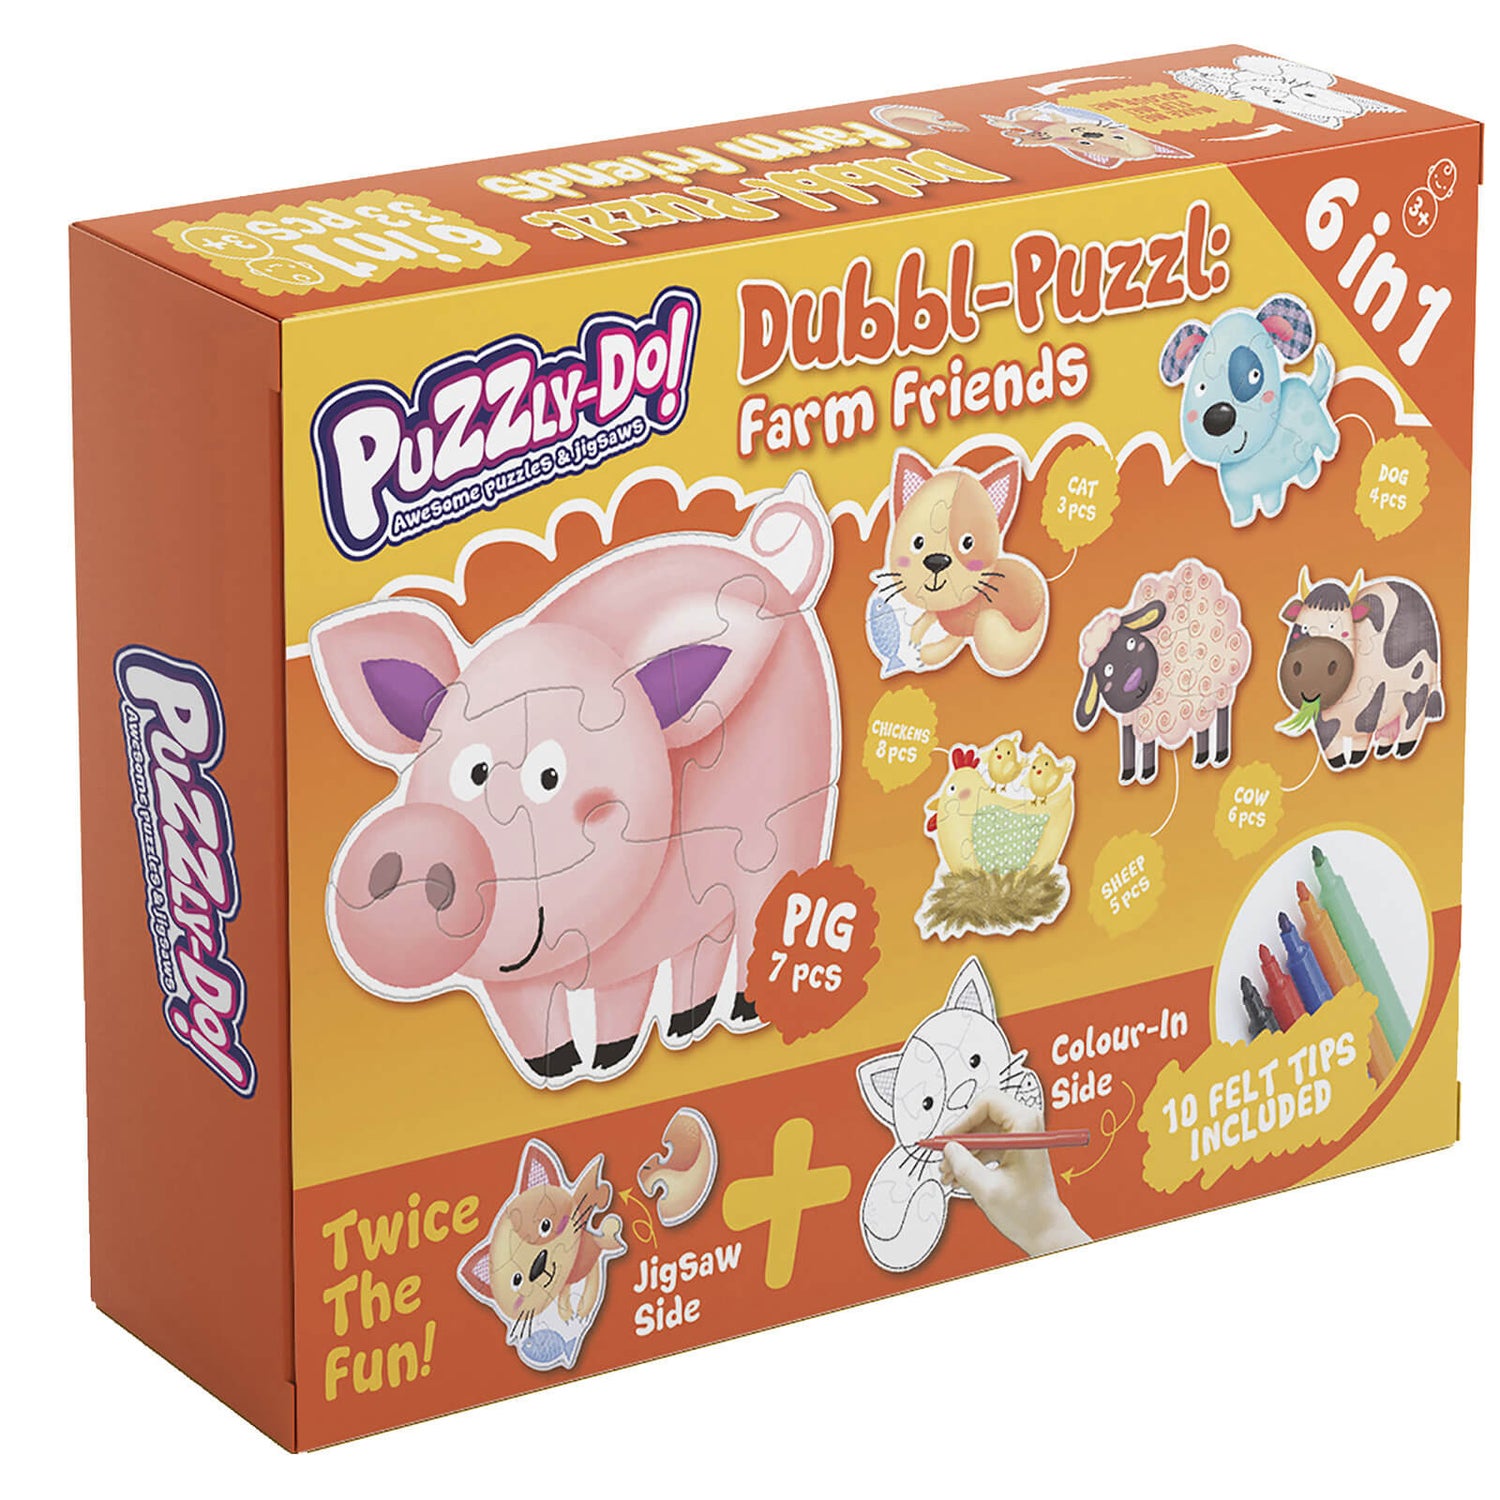 Puzzly-Do Farm Friends Dubbl-Puzzl Jigsaw and Colouring